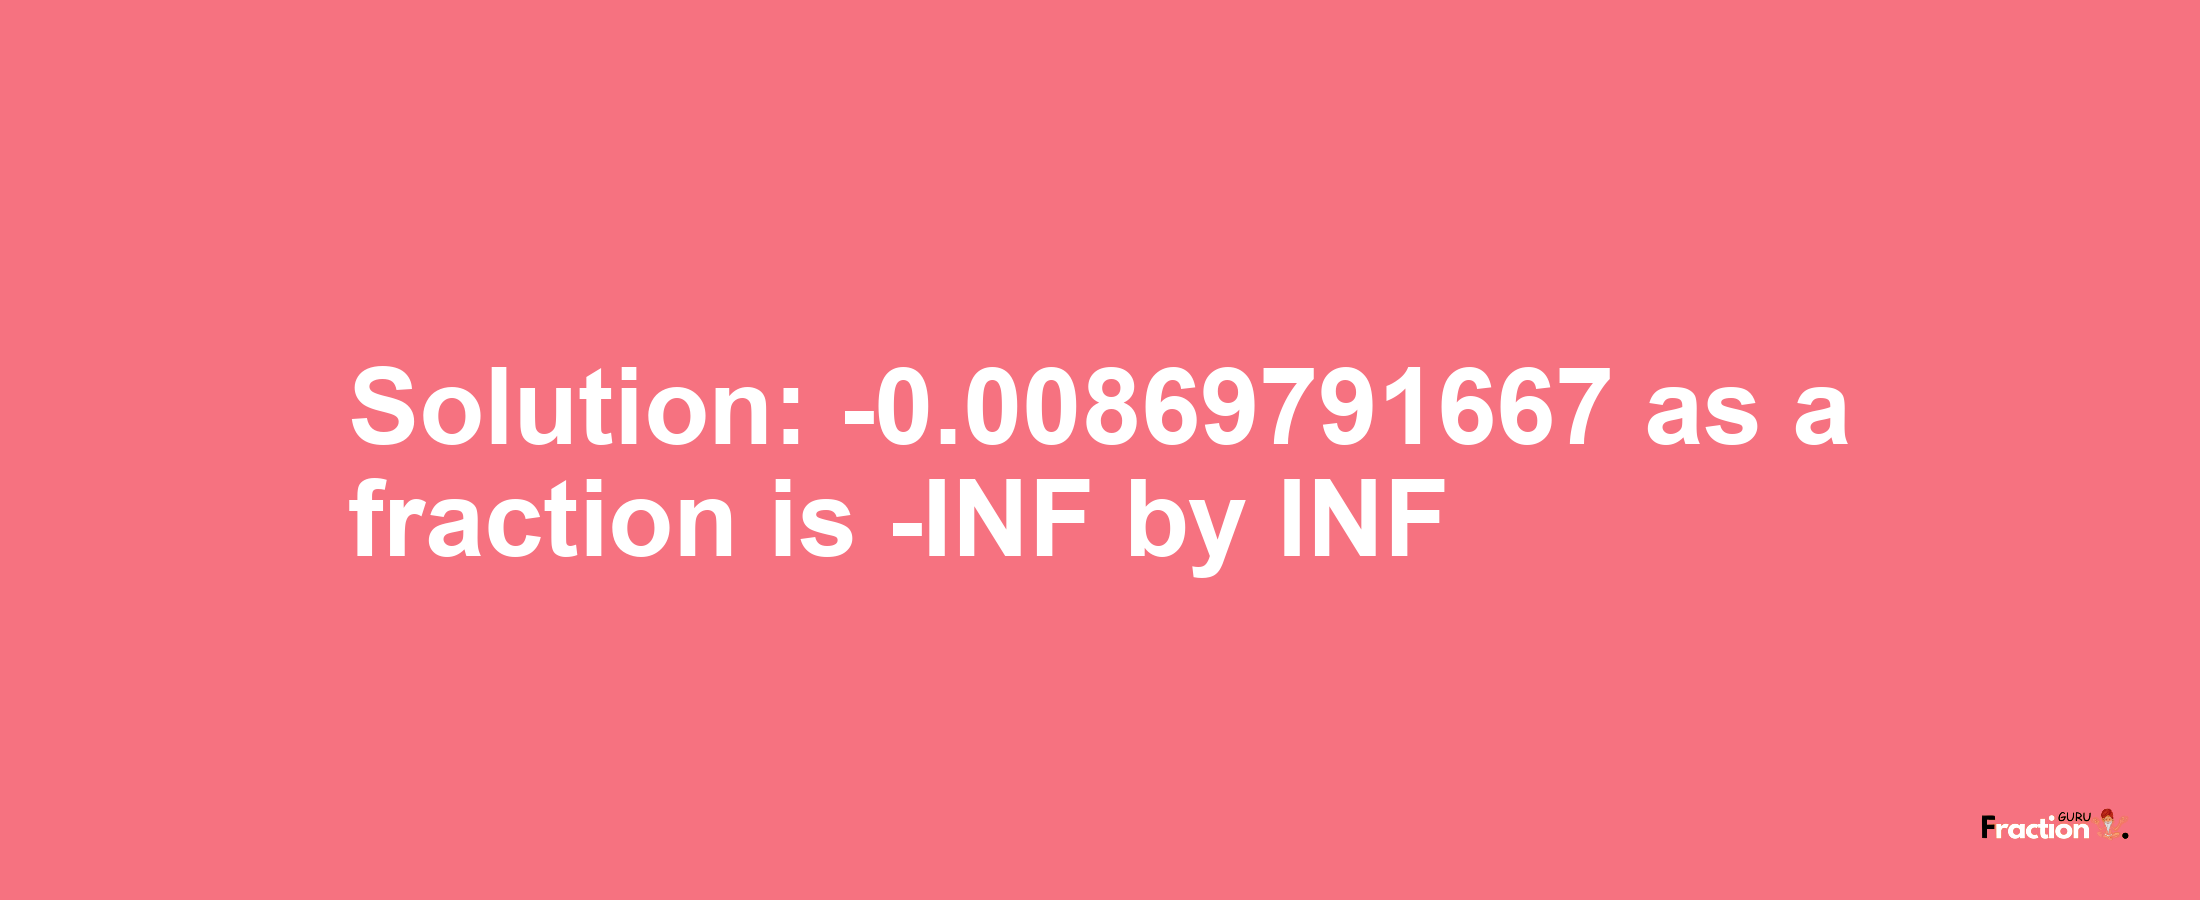 Solution:-0.00869791667 as a fraction is -INF/INF